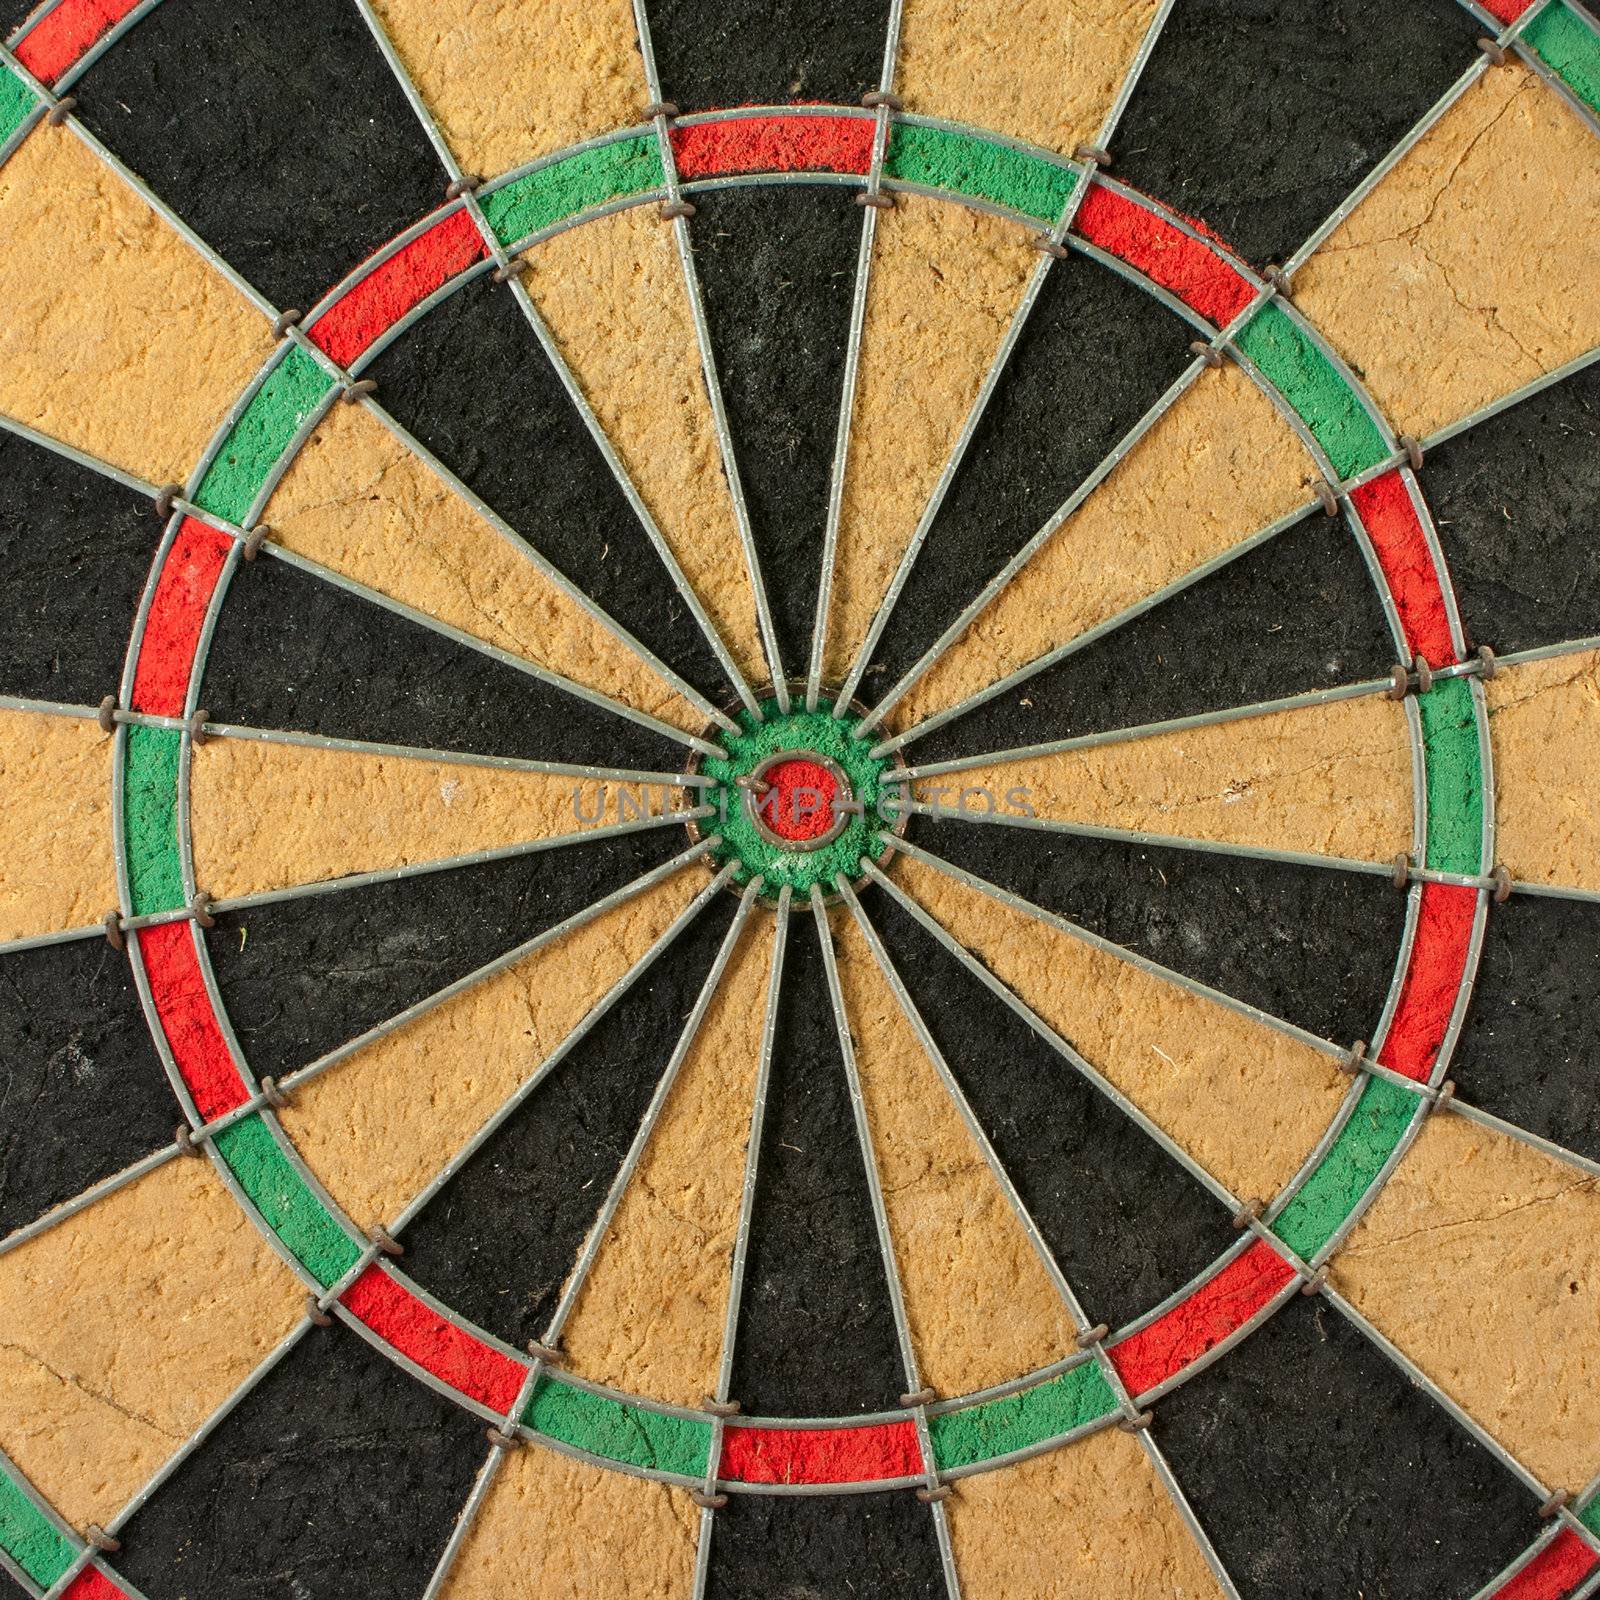 The centre circle of a darts game